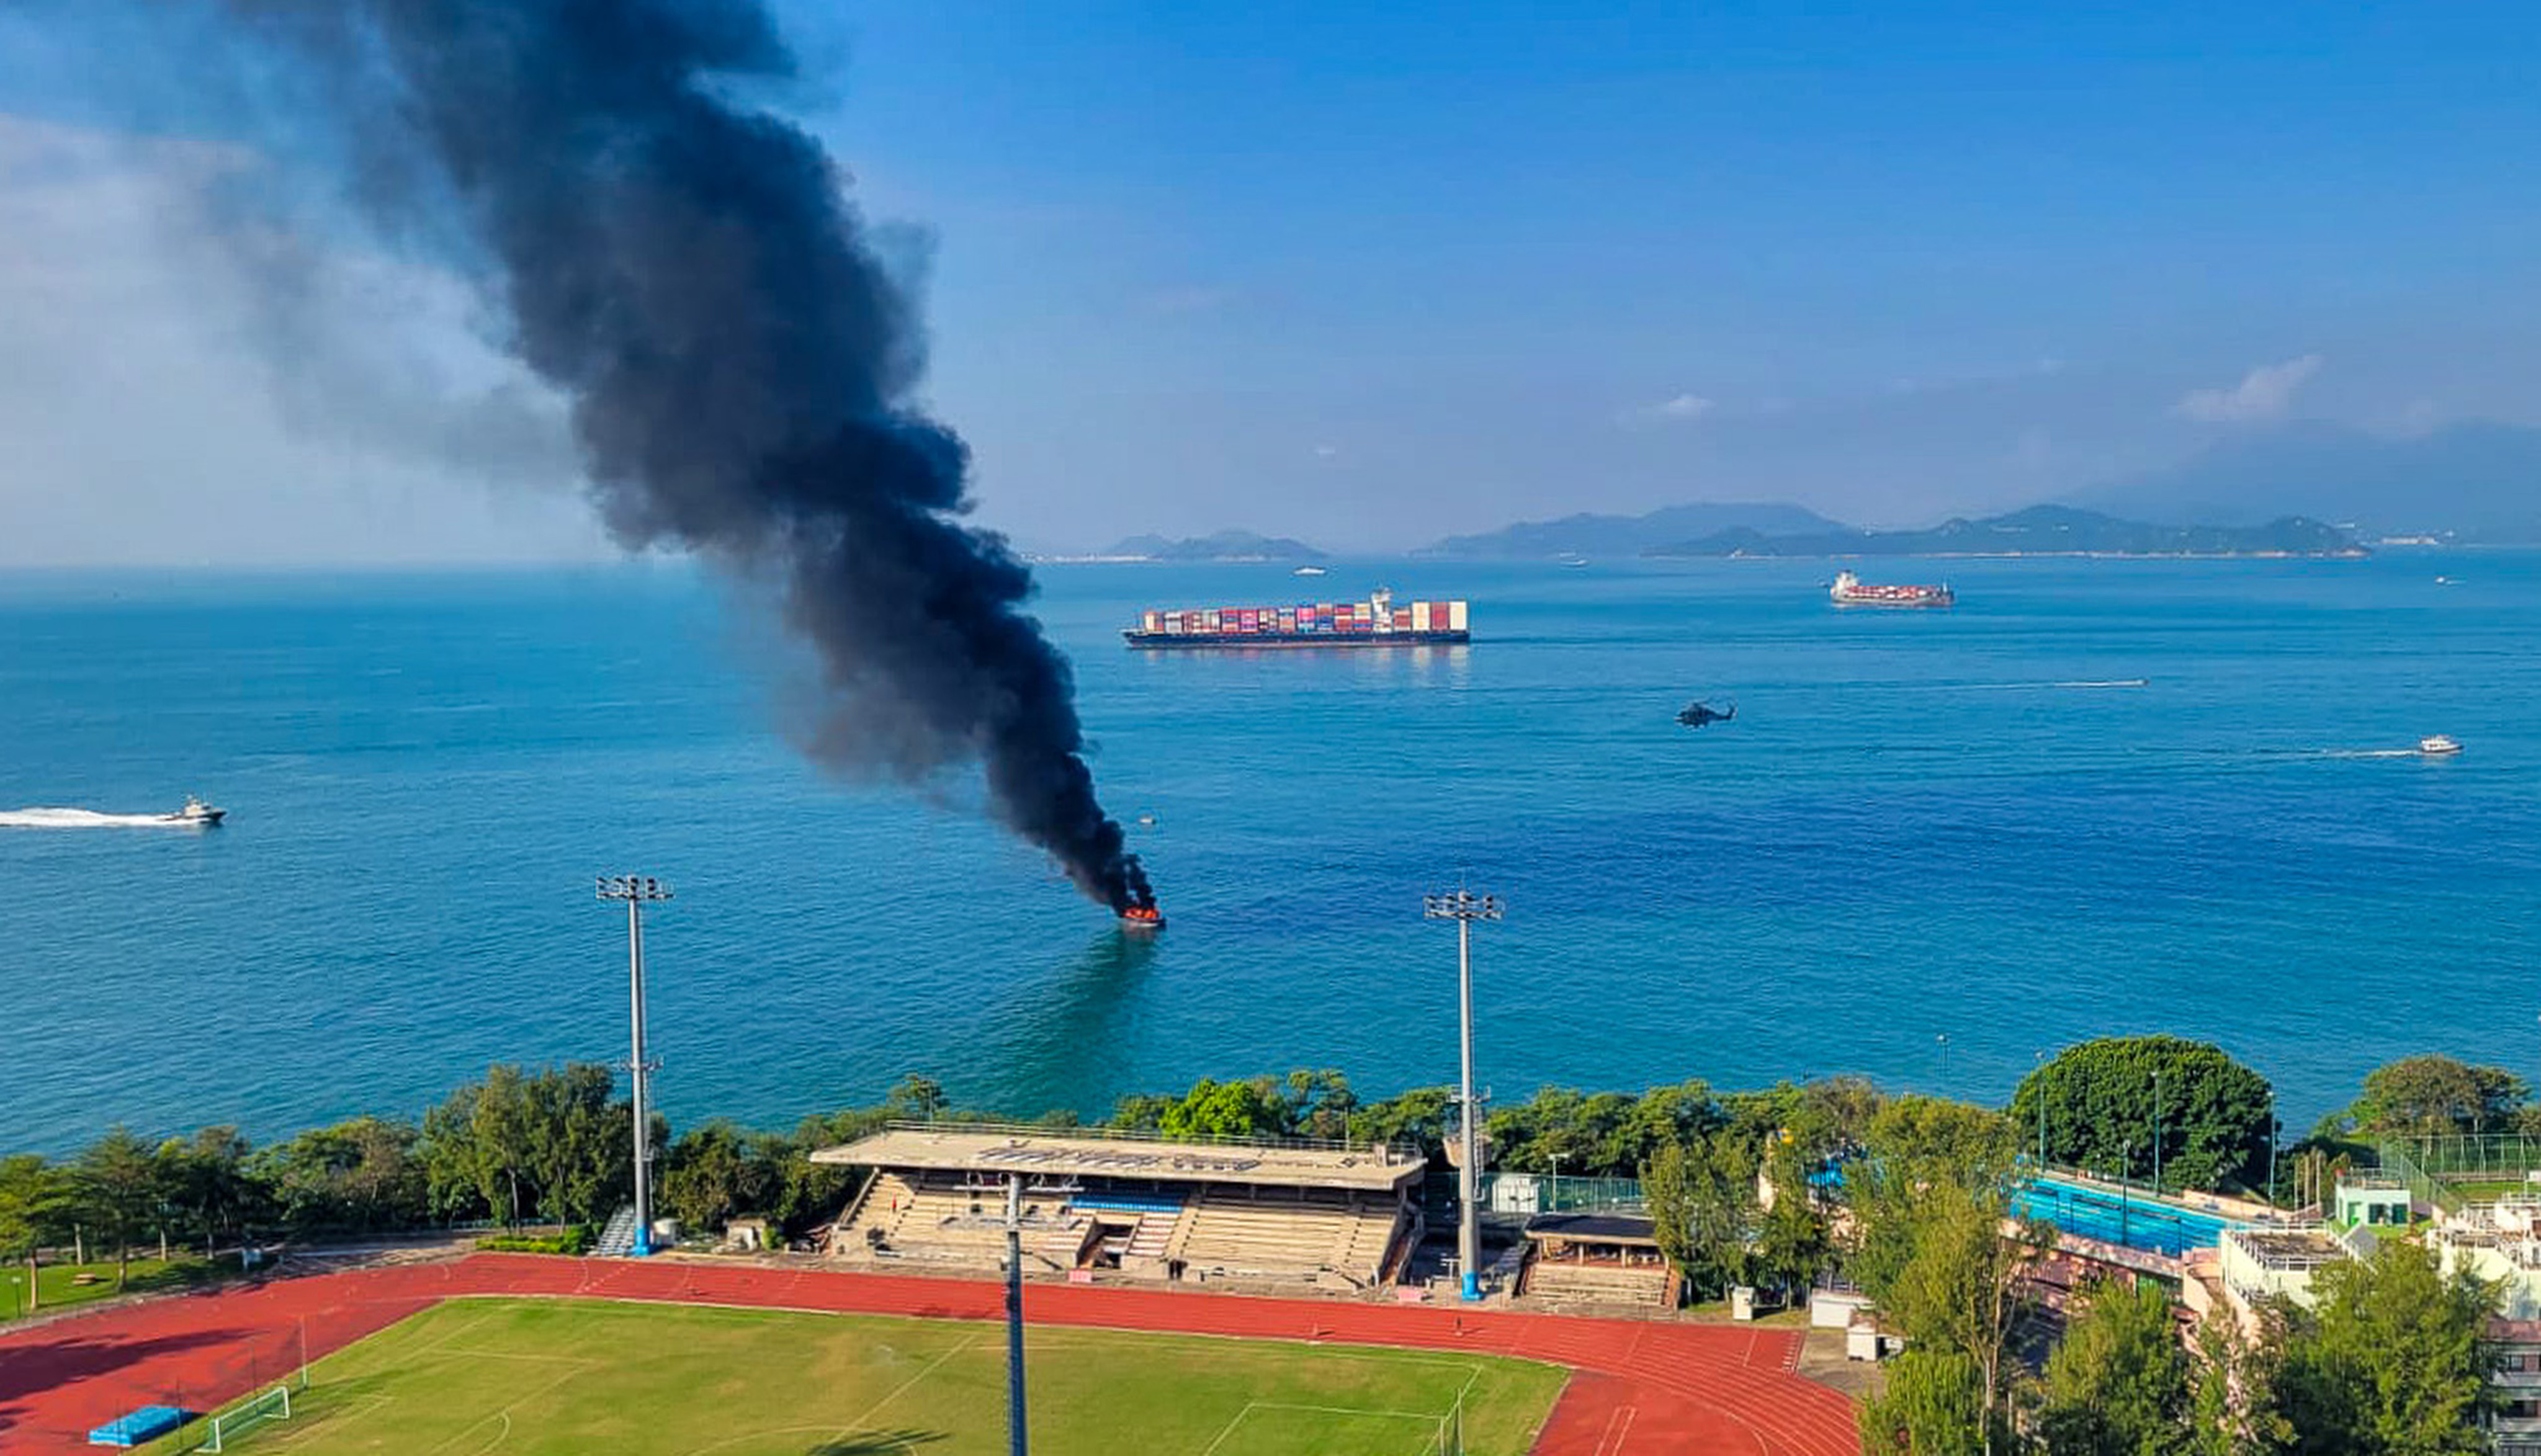 The vessel caught fire about 200 metres off Telegraph Bay on the southwest of Hong Kong Island. Photo: Quentin A. Parker